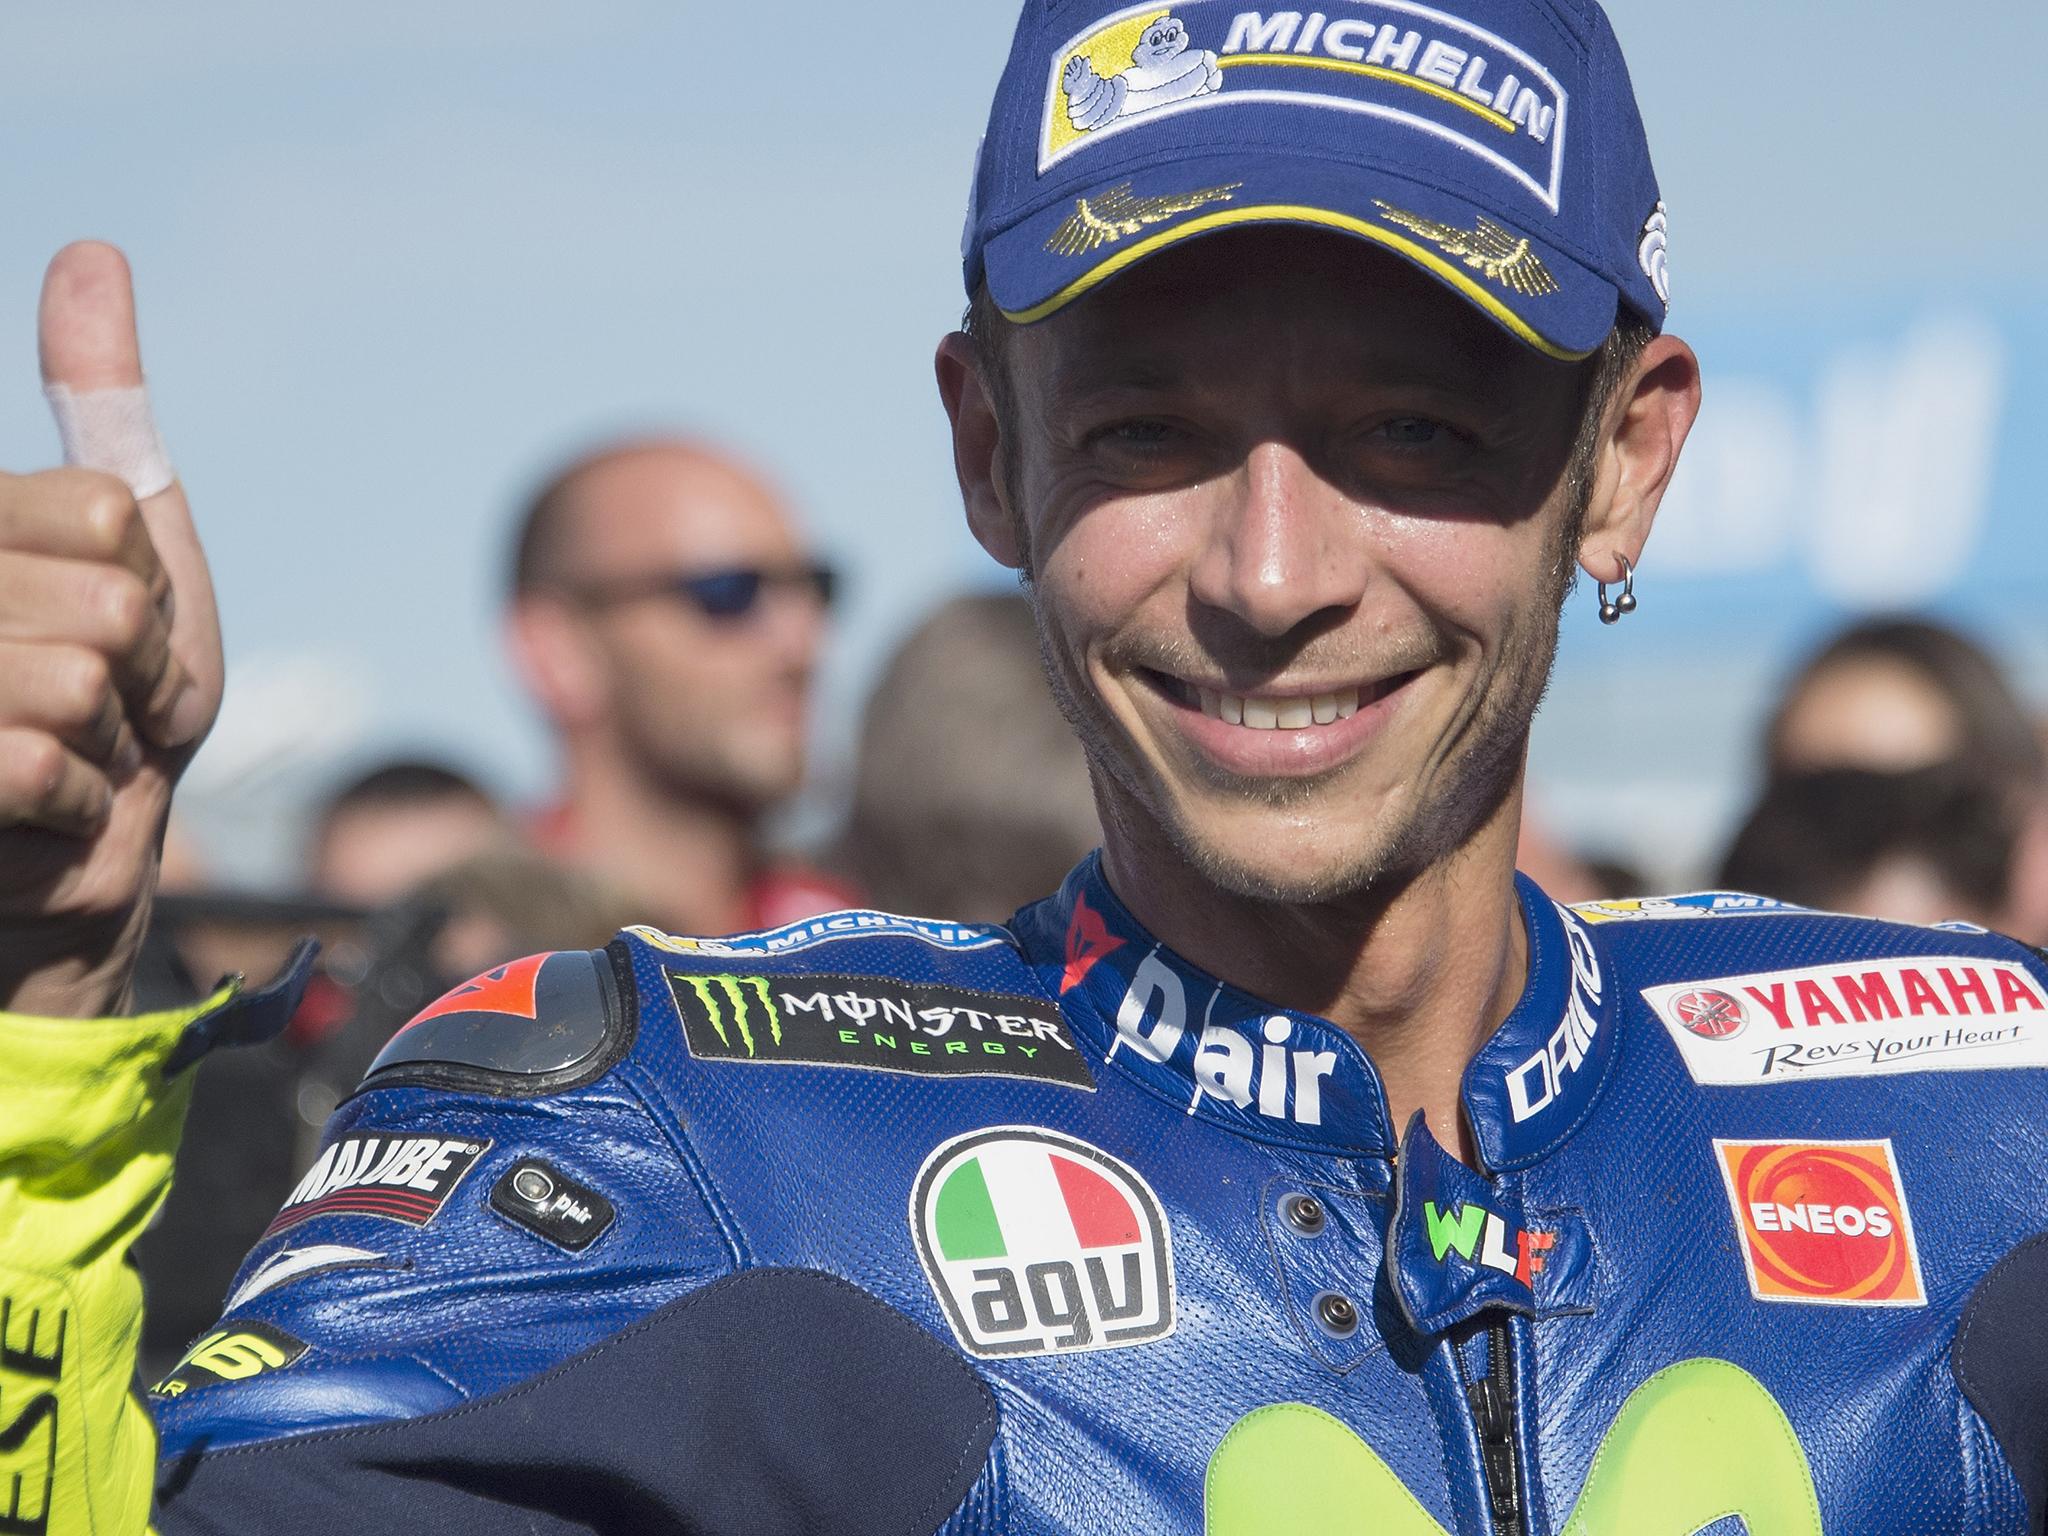 Valentino Rossi will attempt to race at the Grand Prix of Aragon this weekend despite breaking his leg